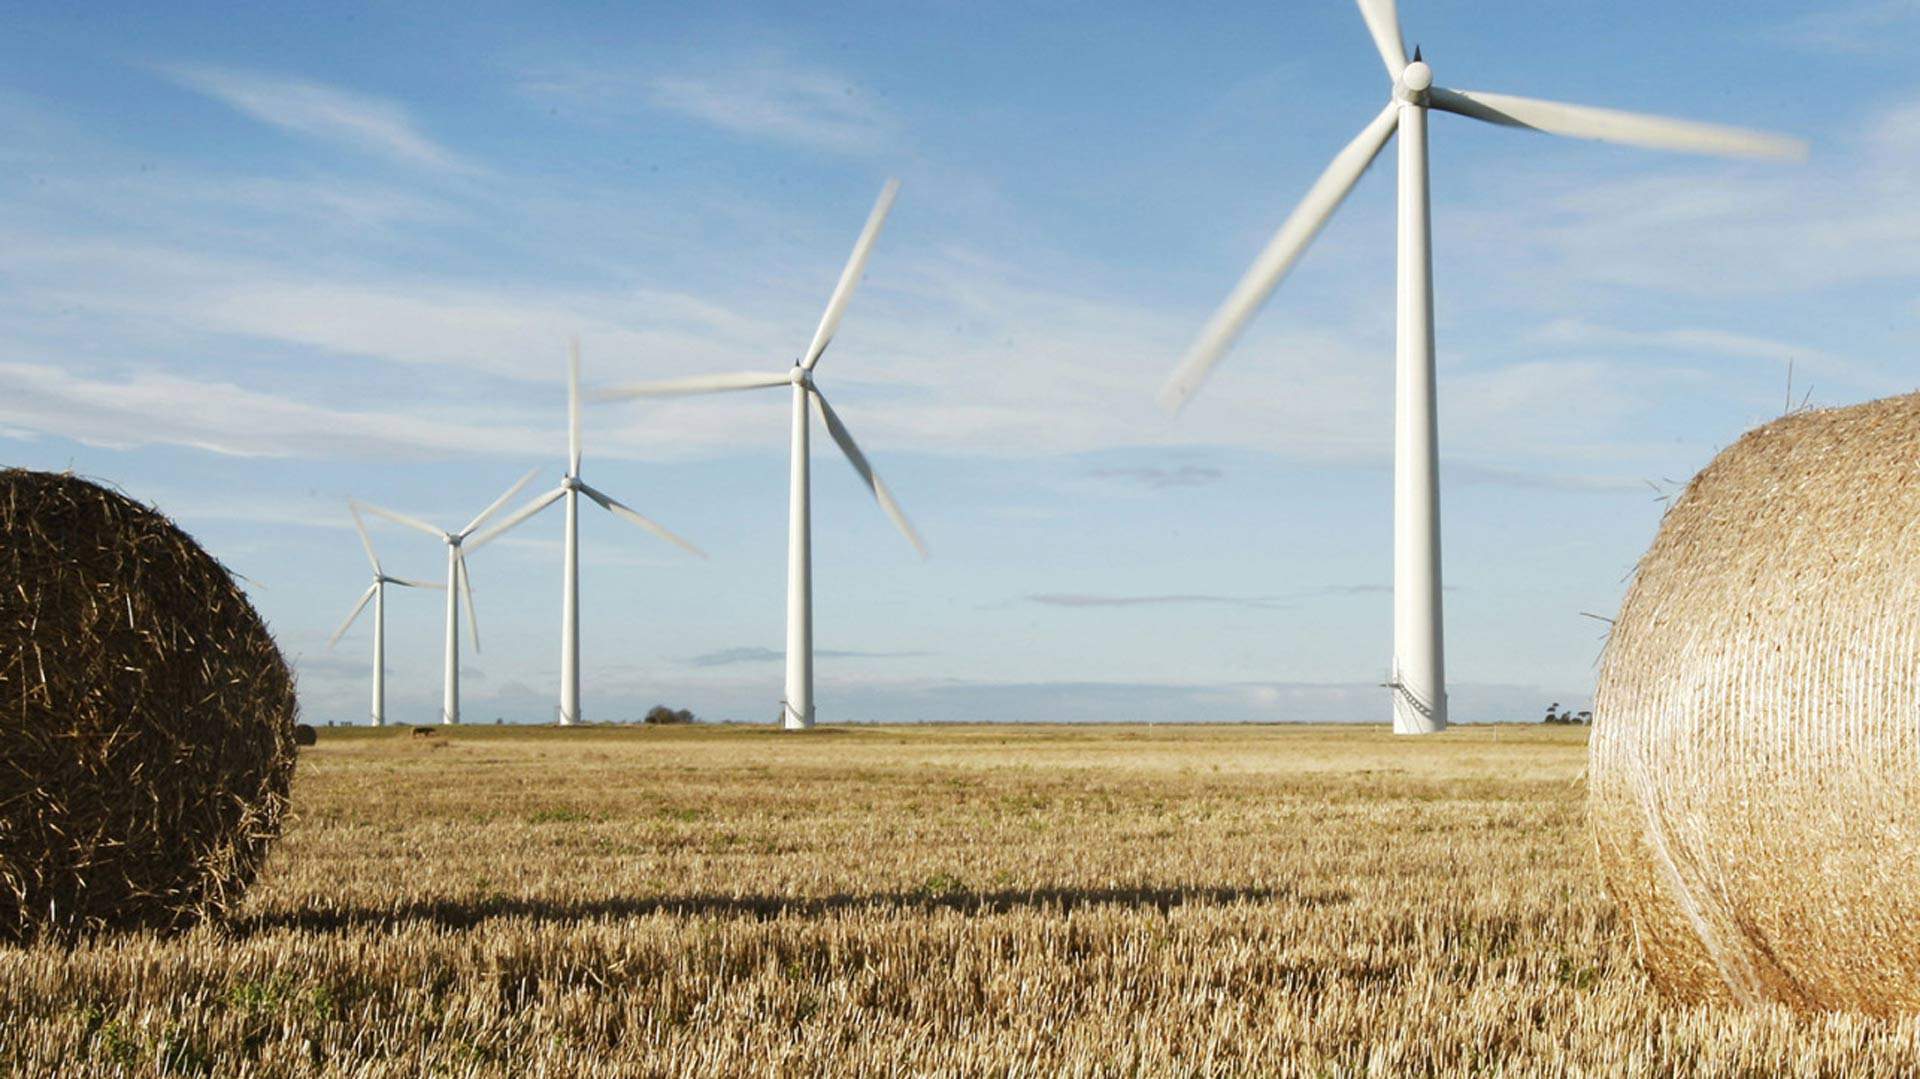 Victoria's $1.5 Billion New Wind Farm Could Supply Ten Percent of the State's Energy